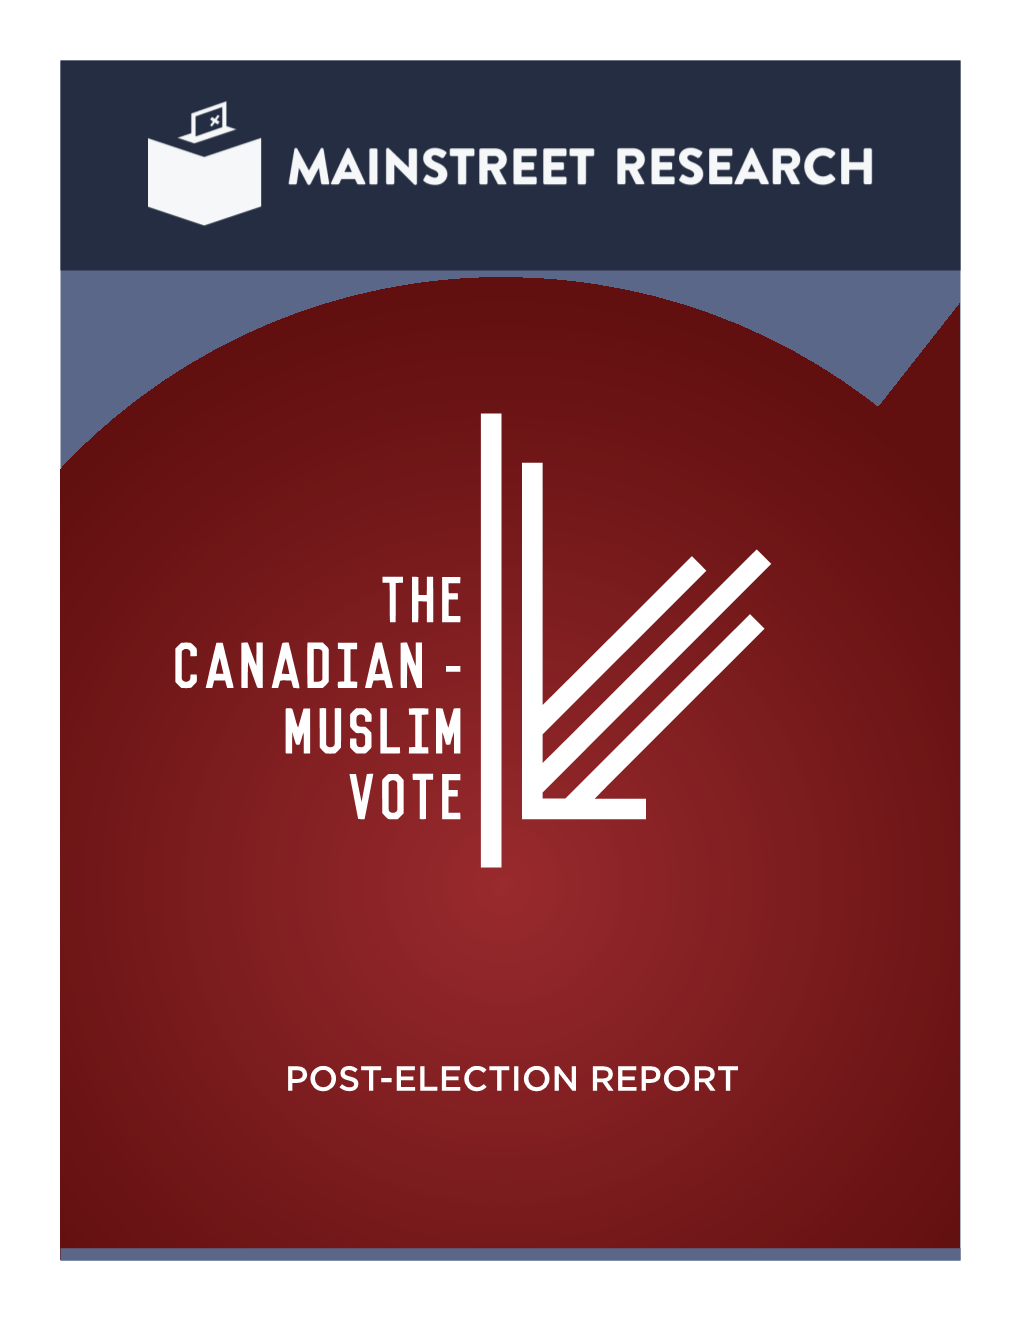 POST-ELECTION REPORT “Ontario Election” by Knehcsg Is Licensed Under 2.0 CC BY-SA